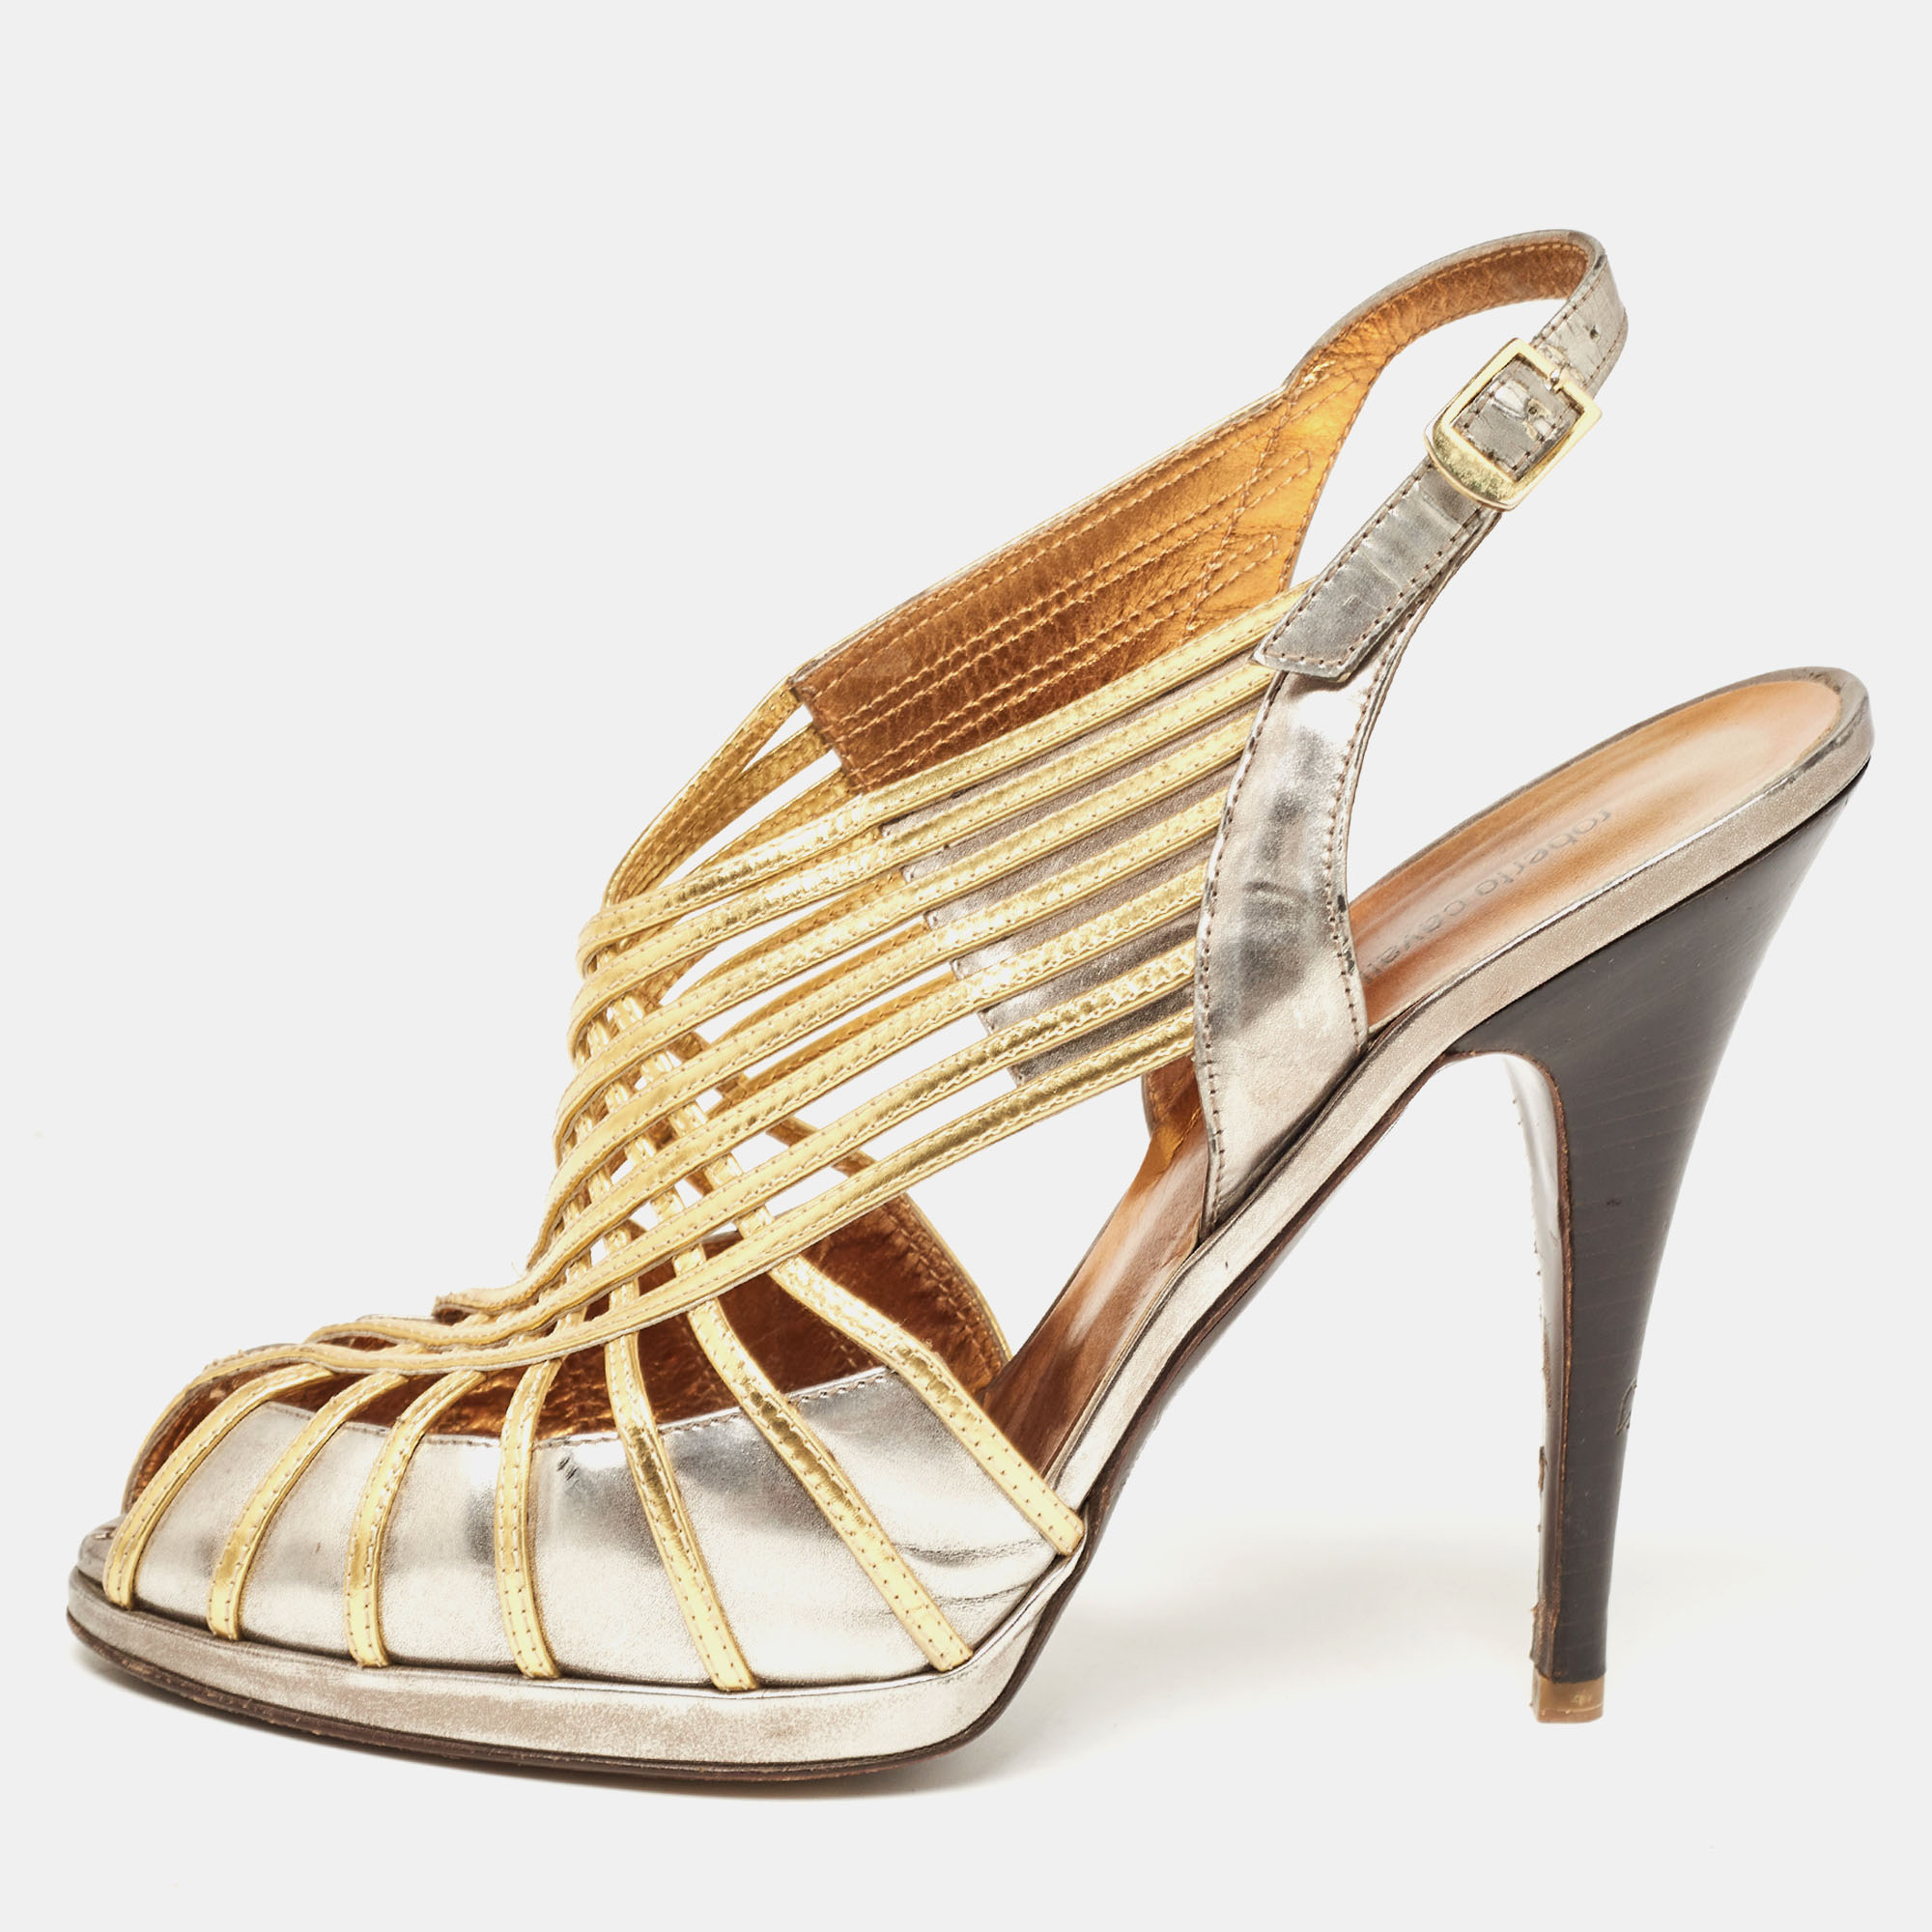 Pre-owned Roberto Cavalli Metallic Leather Strappy Sandals Size 40